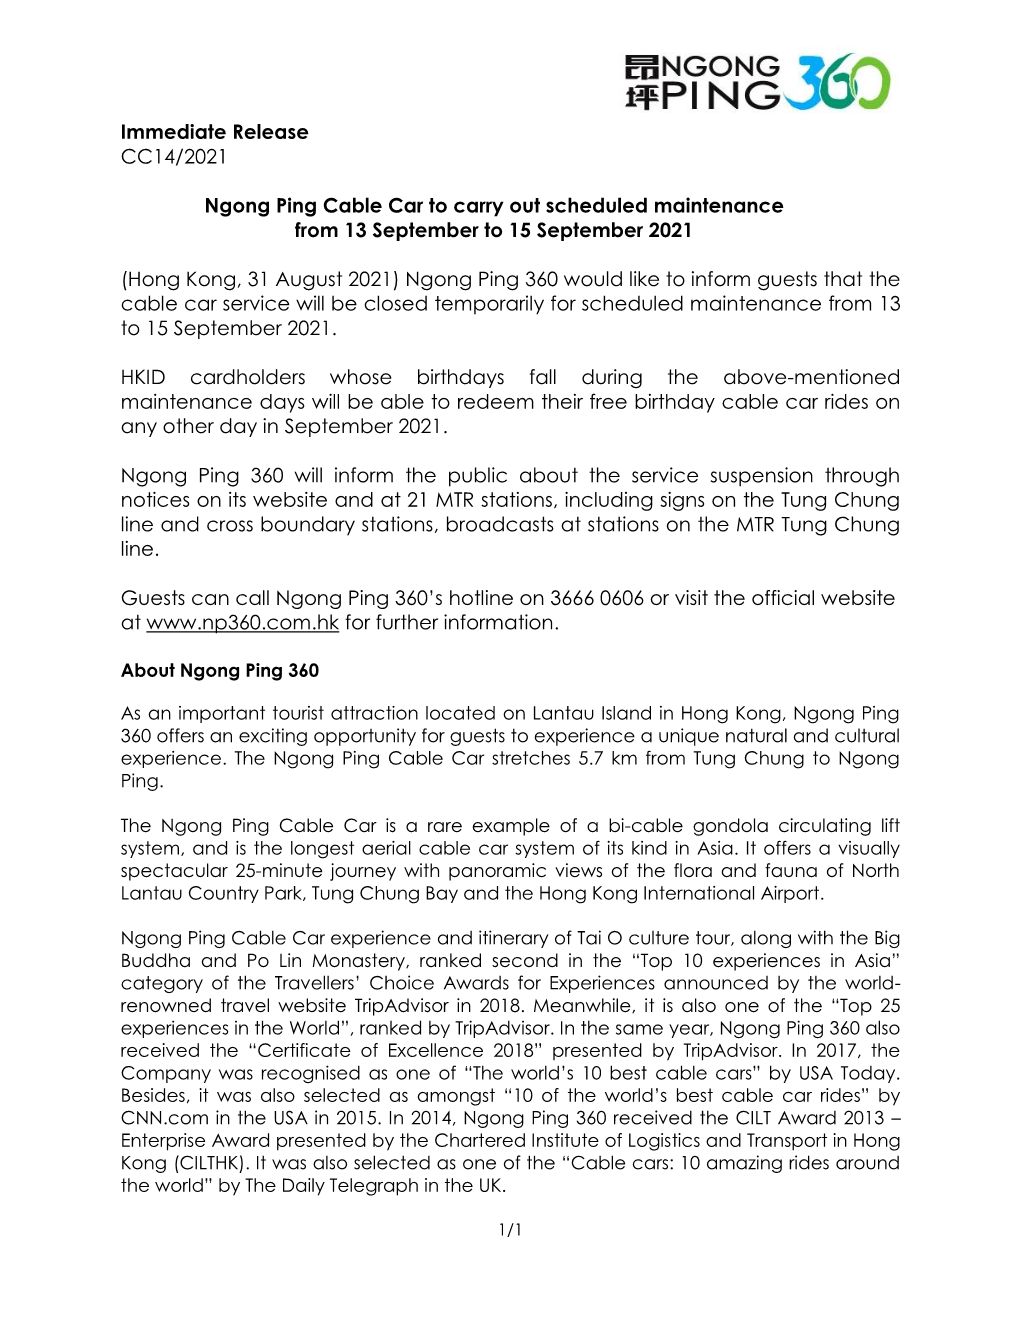 Immediate Release CC14/2021 Ngong Ping Cable Car to Carry Out